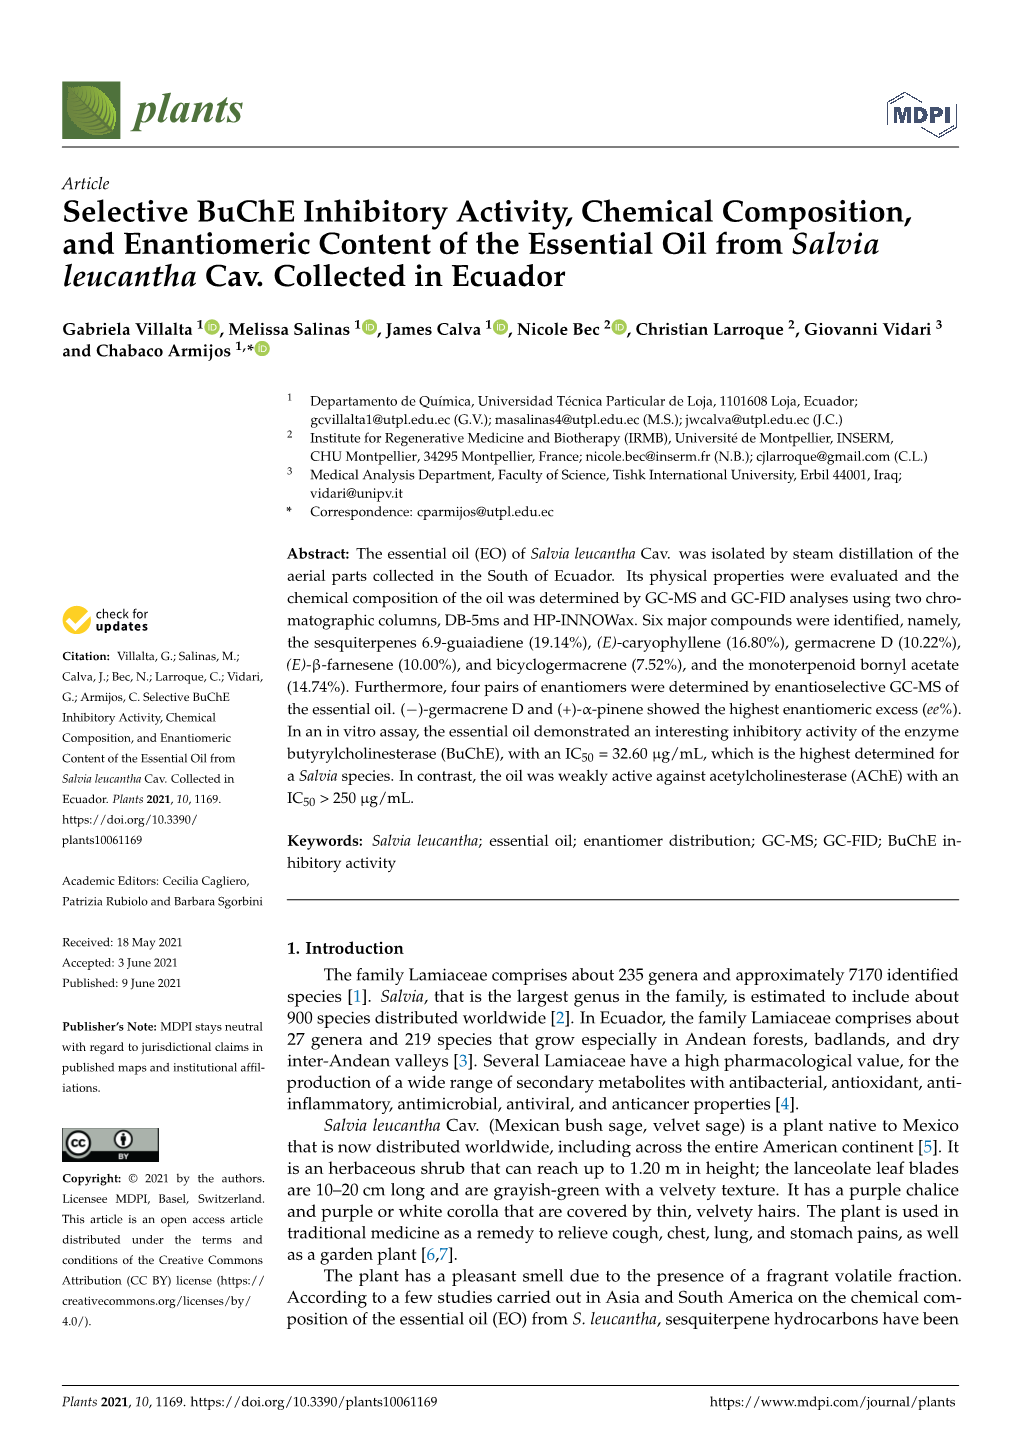 Selective Buche Inhibitory Activity, Chemical Composition, and Enantiomeric Content of the Essential Oil from Salvia Leucantha Cav